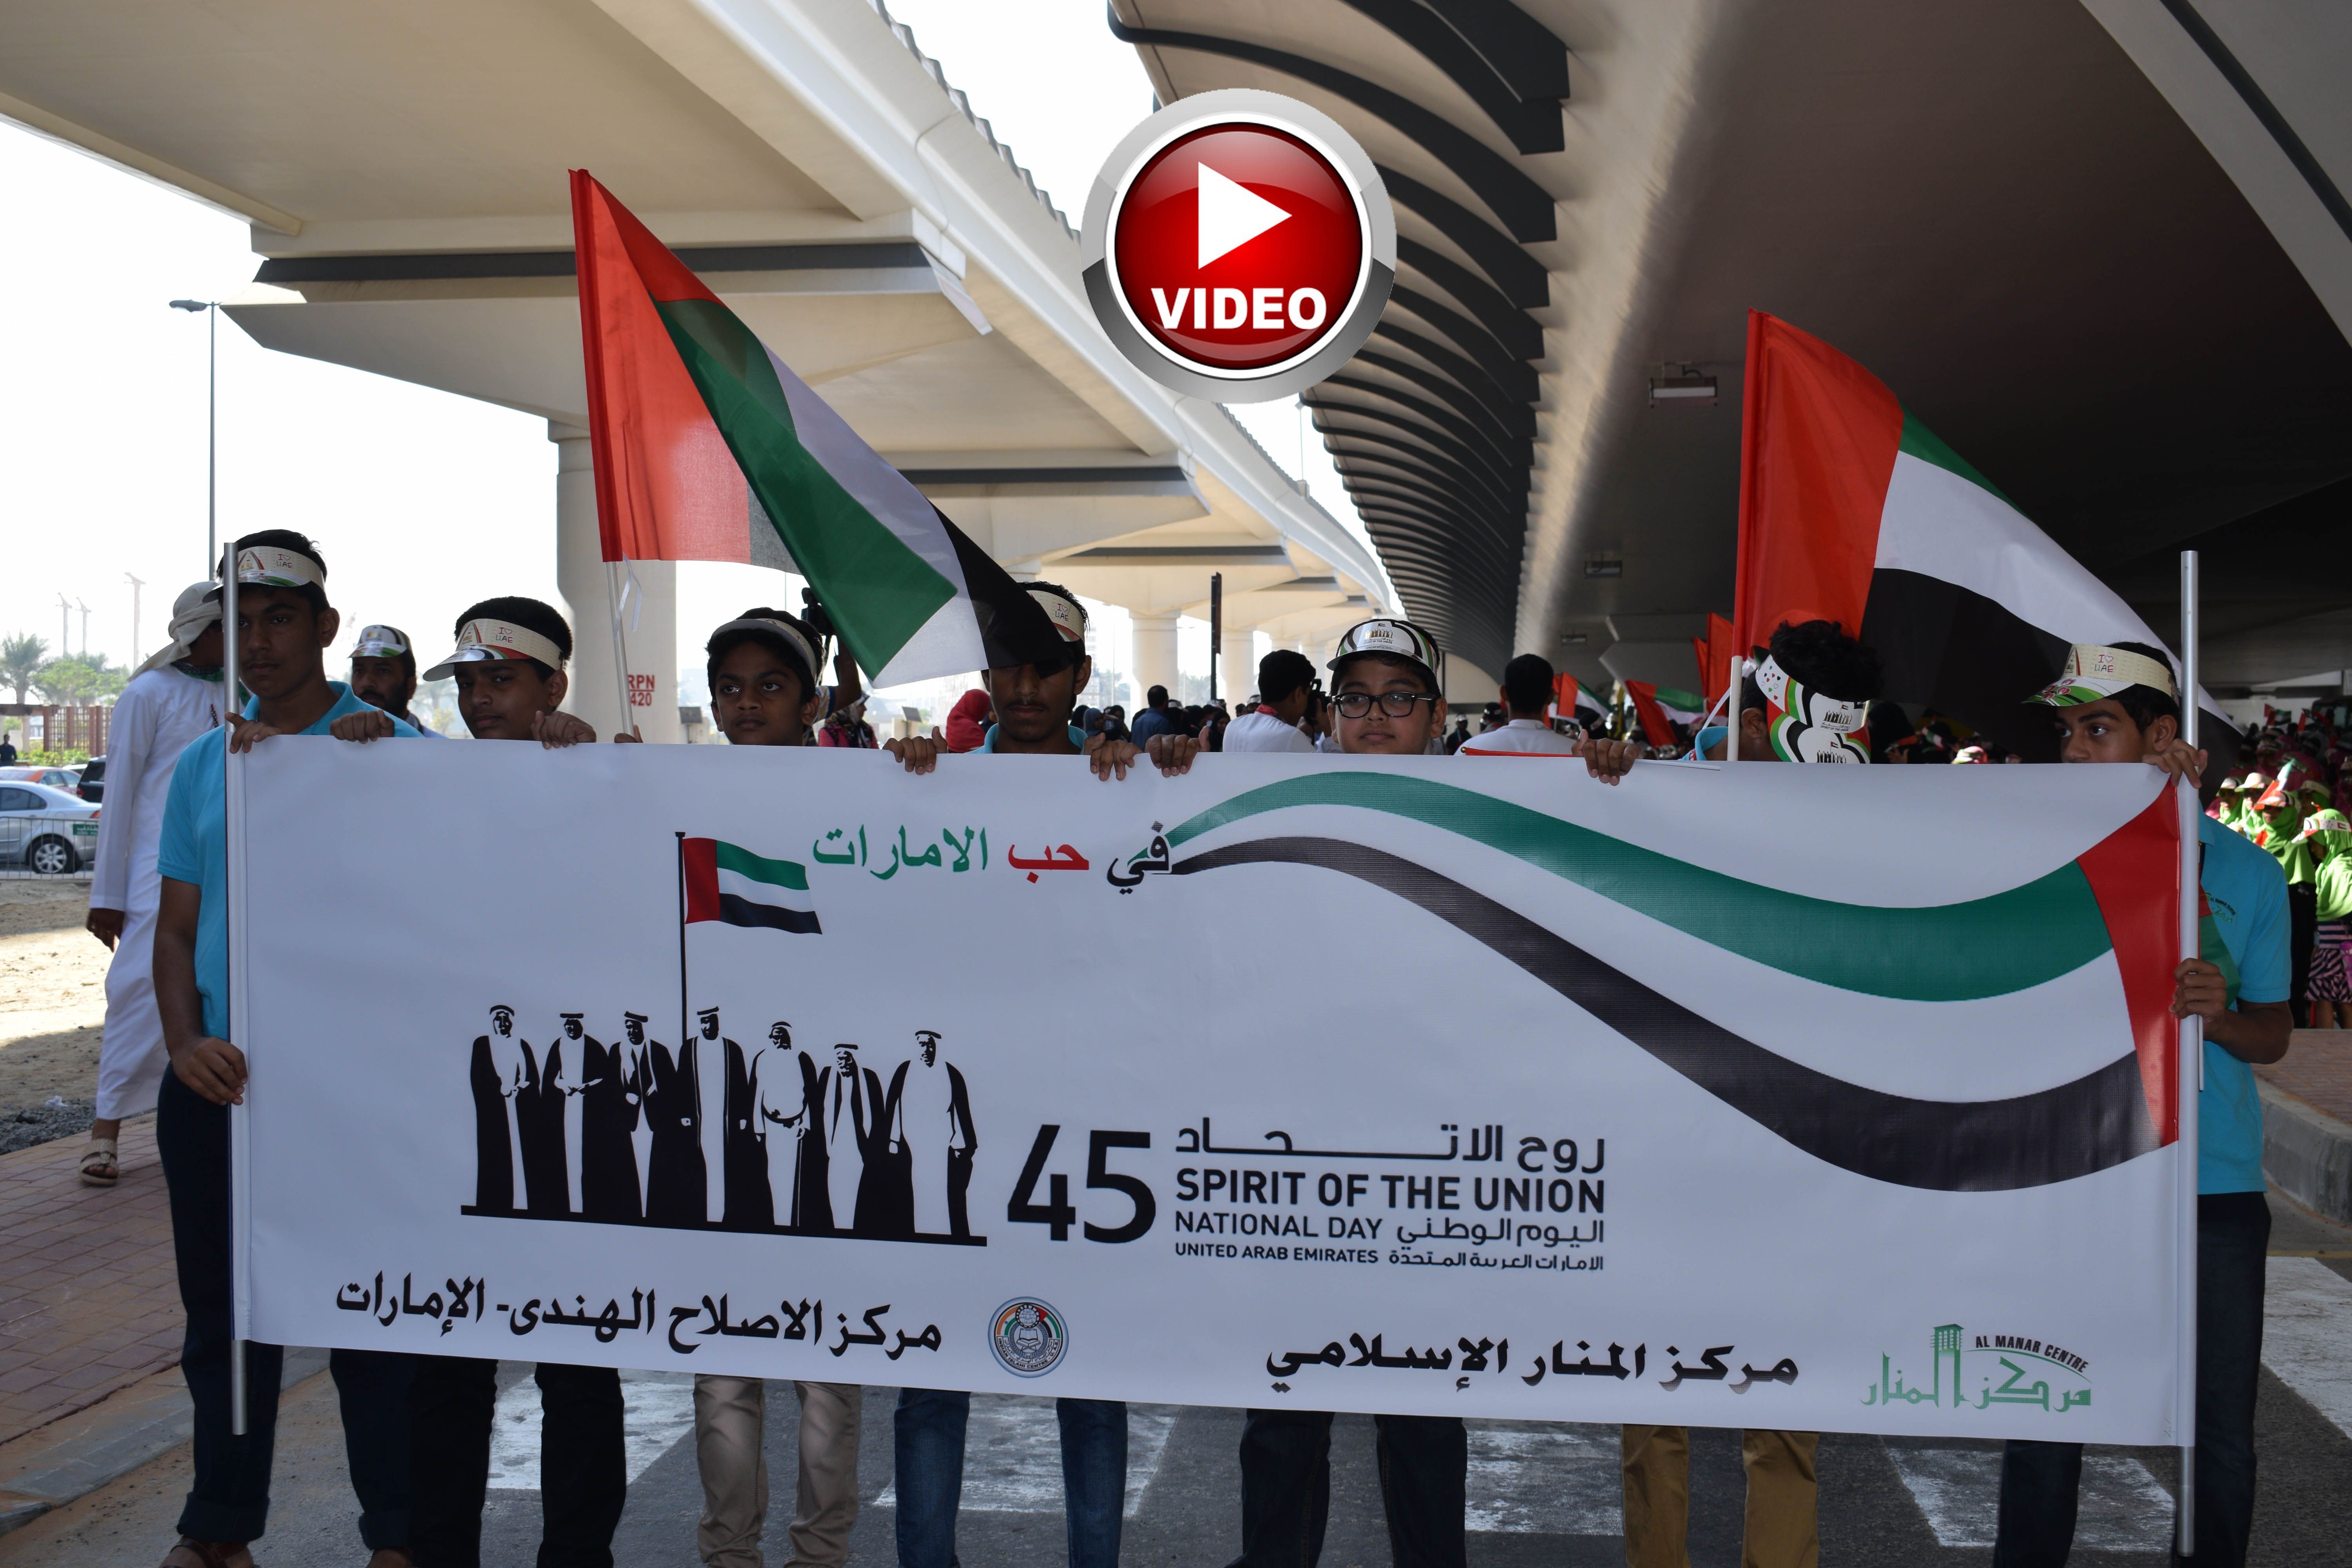 45th National Day (Video)